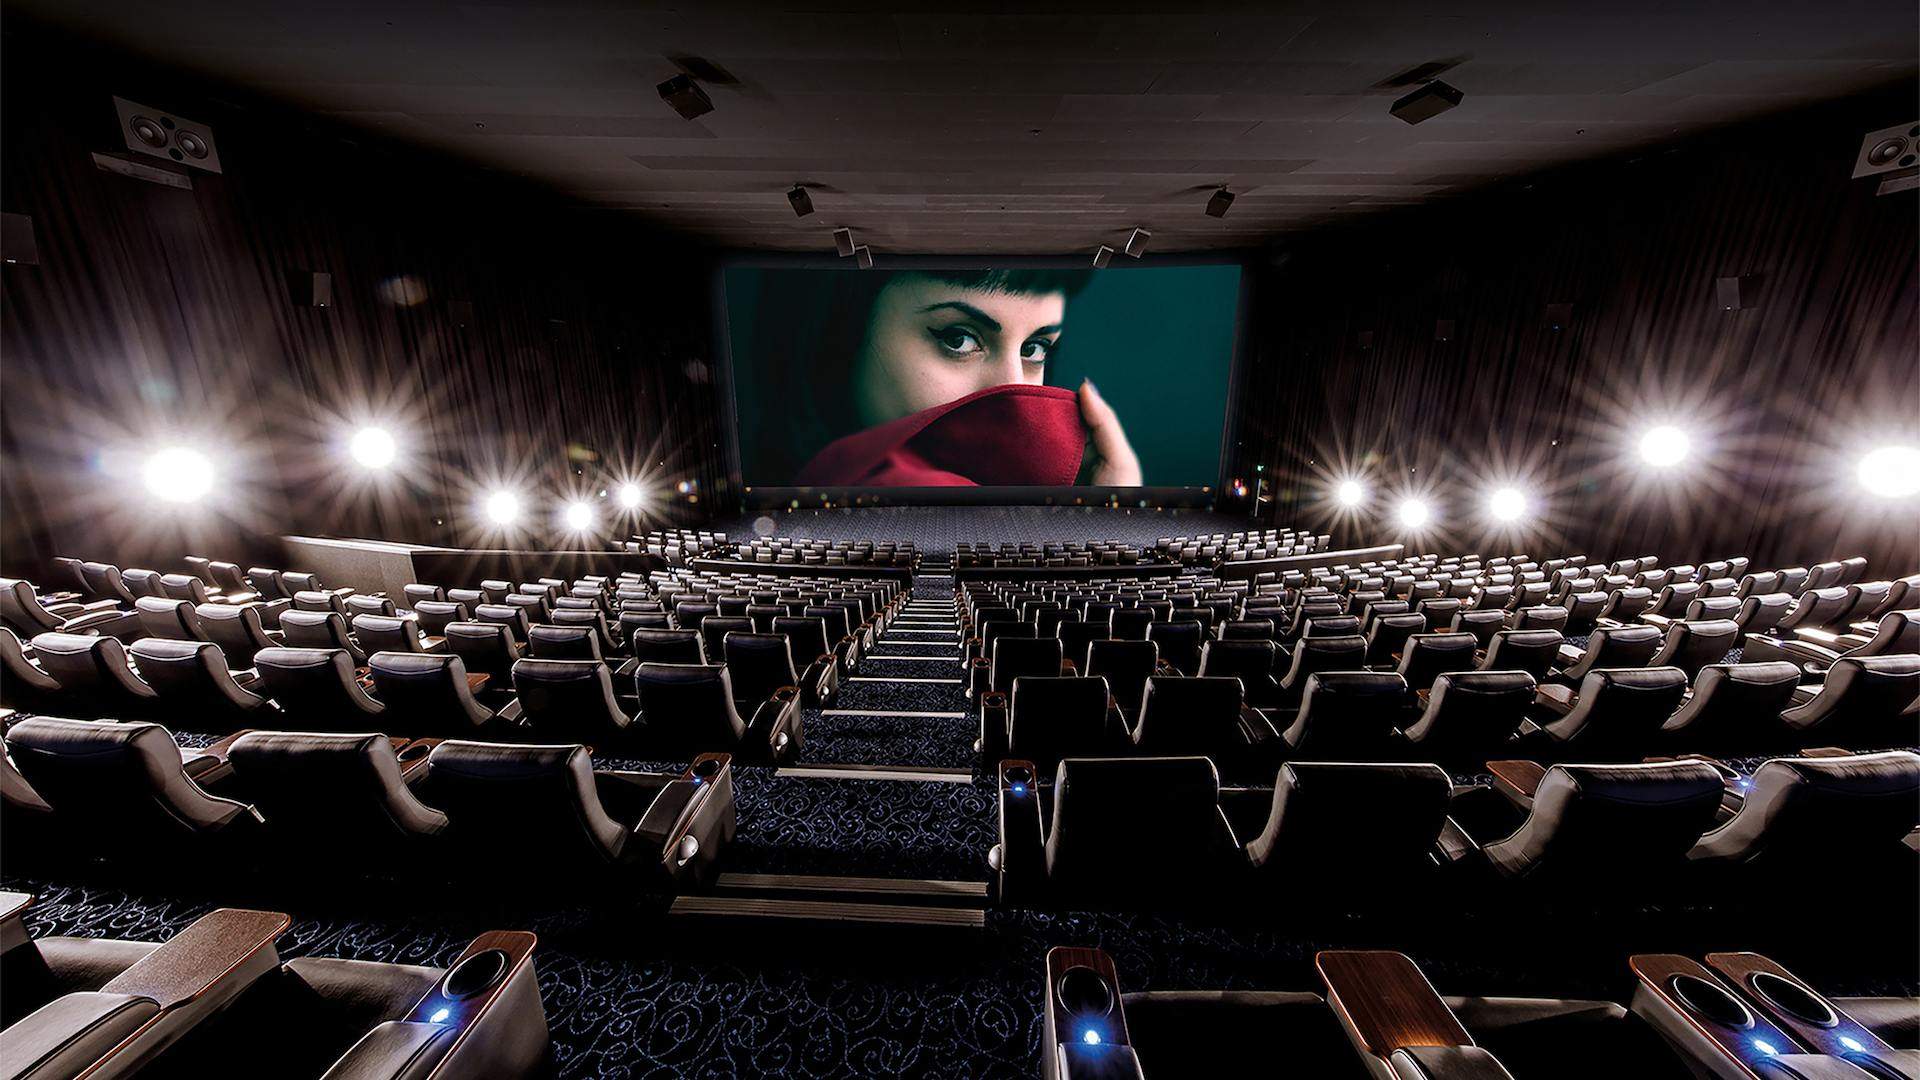 Event Cinemas Is Now Offering Private Screening Experiences for You and 19 Mates